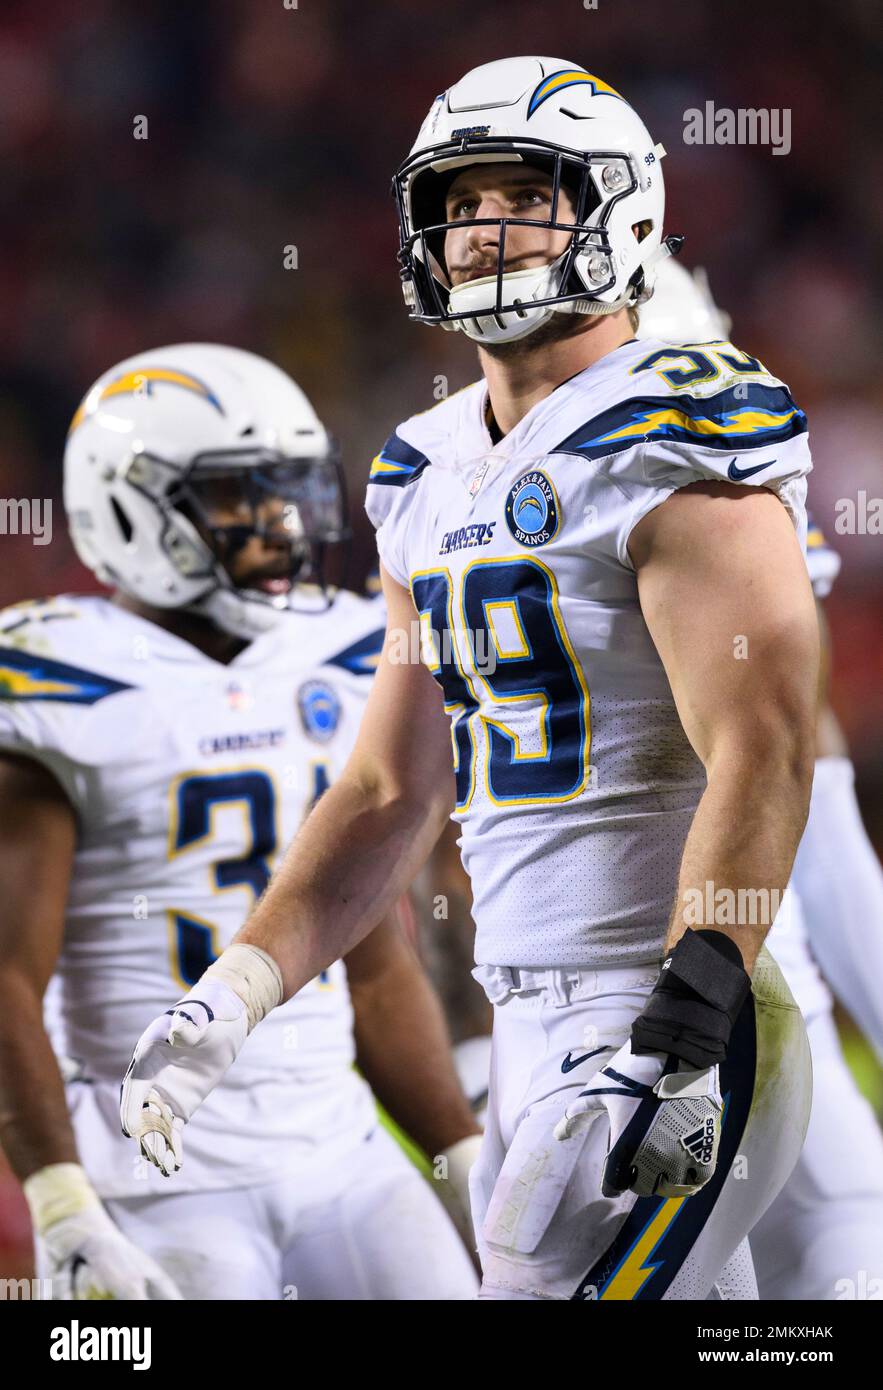 Los Angeles Chargers defensive end Joey Bosa (99) during an NFL